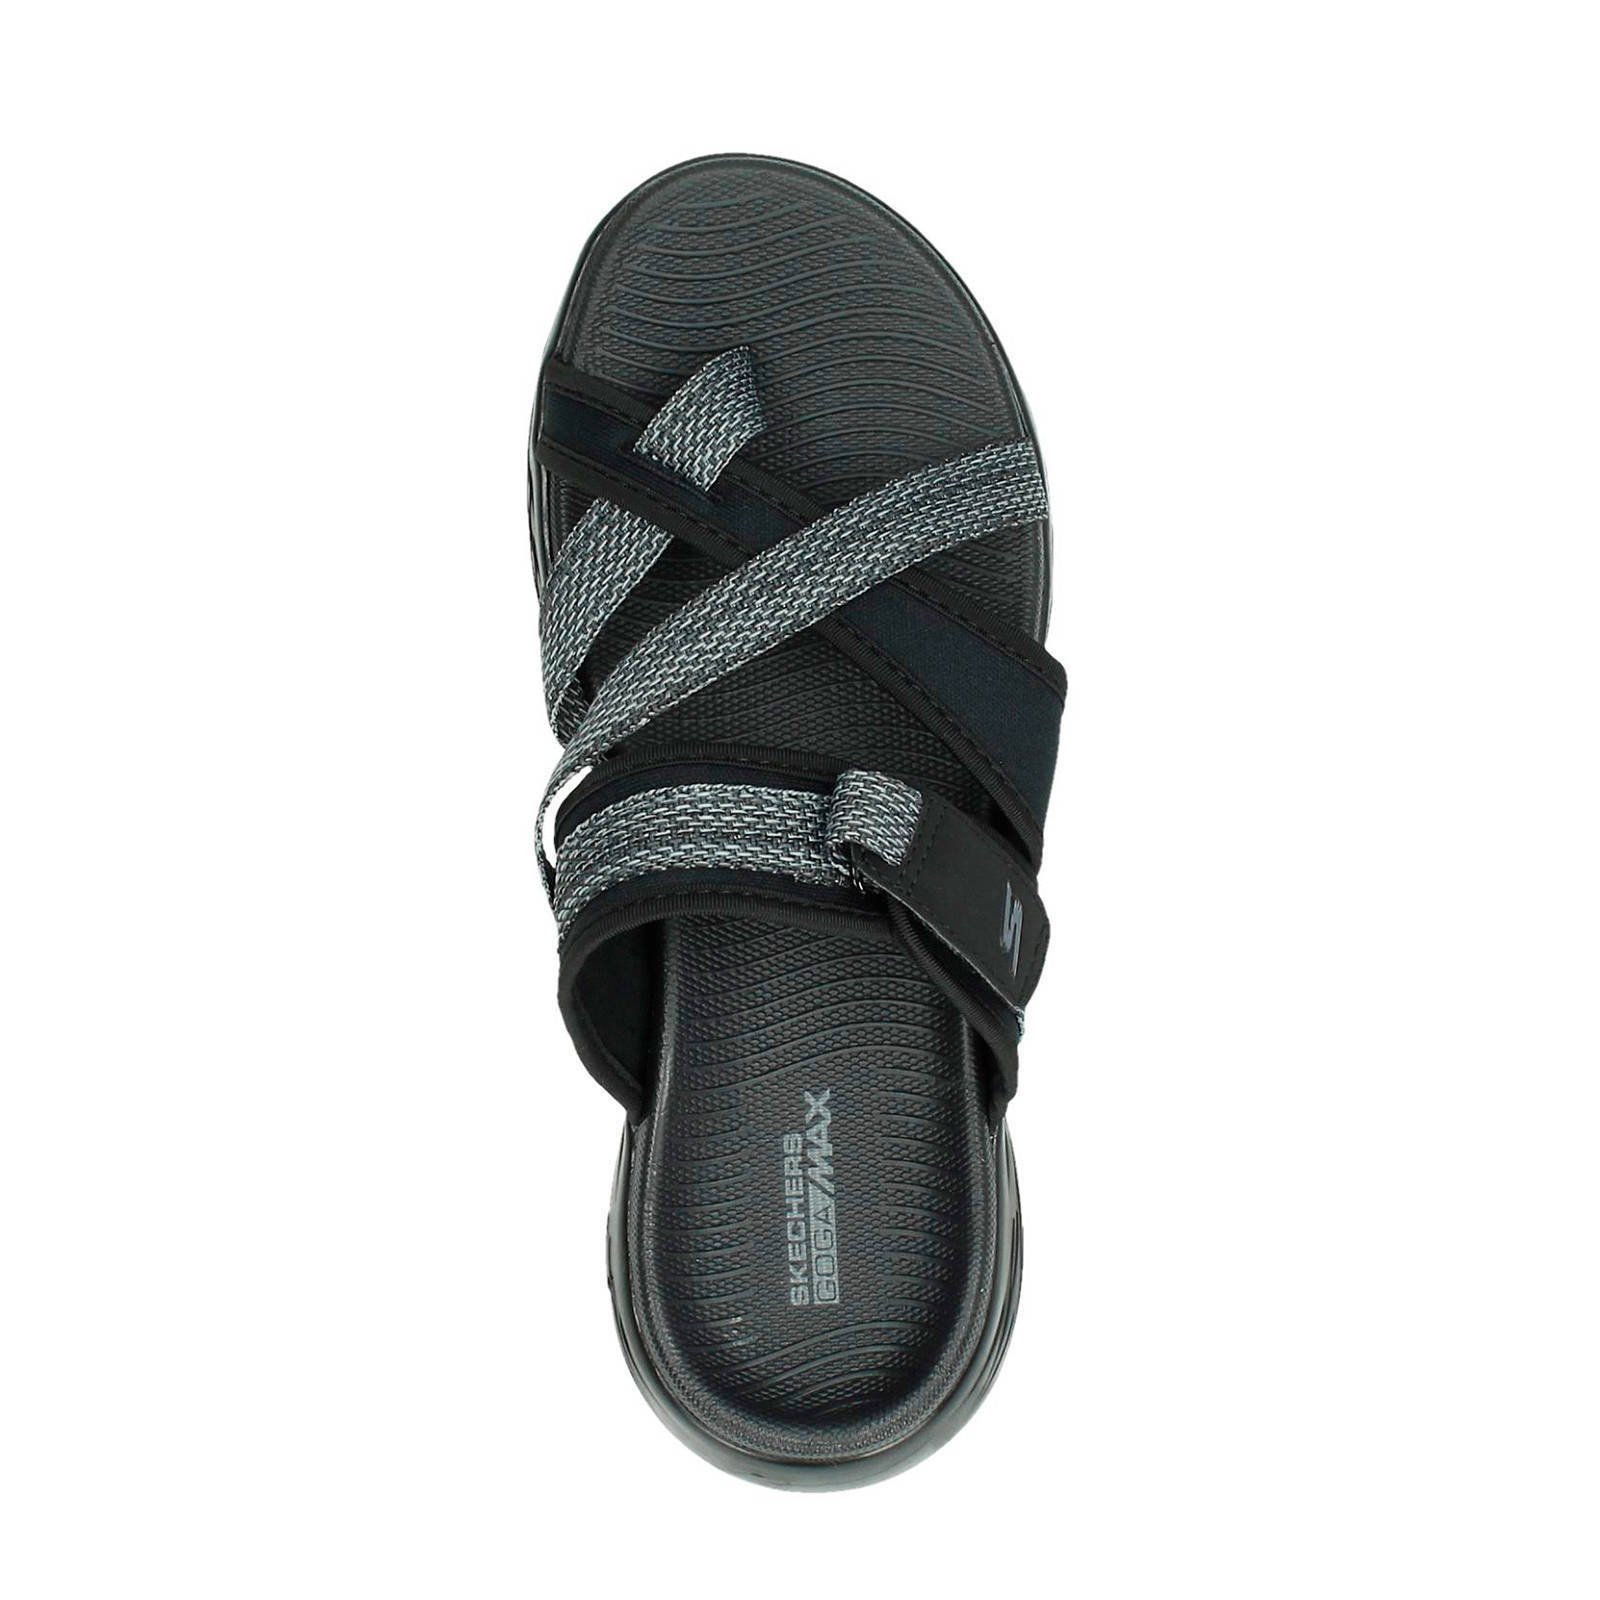 skechers goga max slippers Sale,up to 